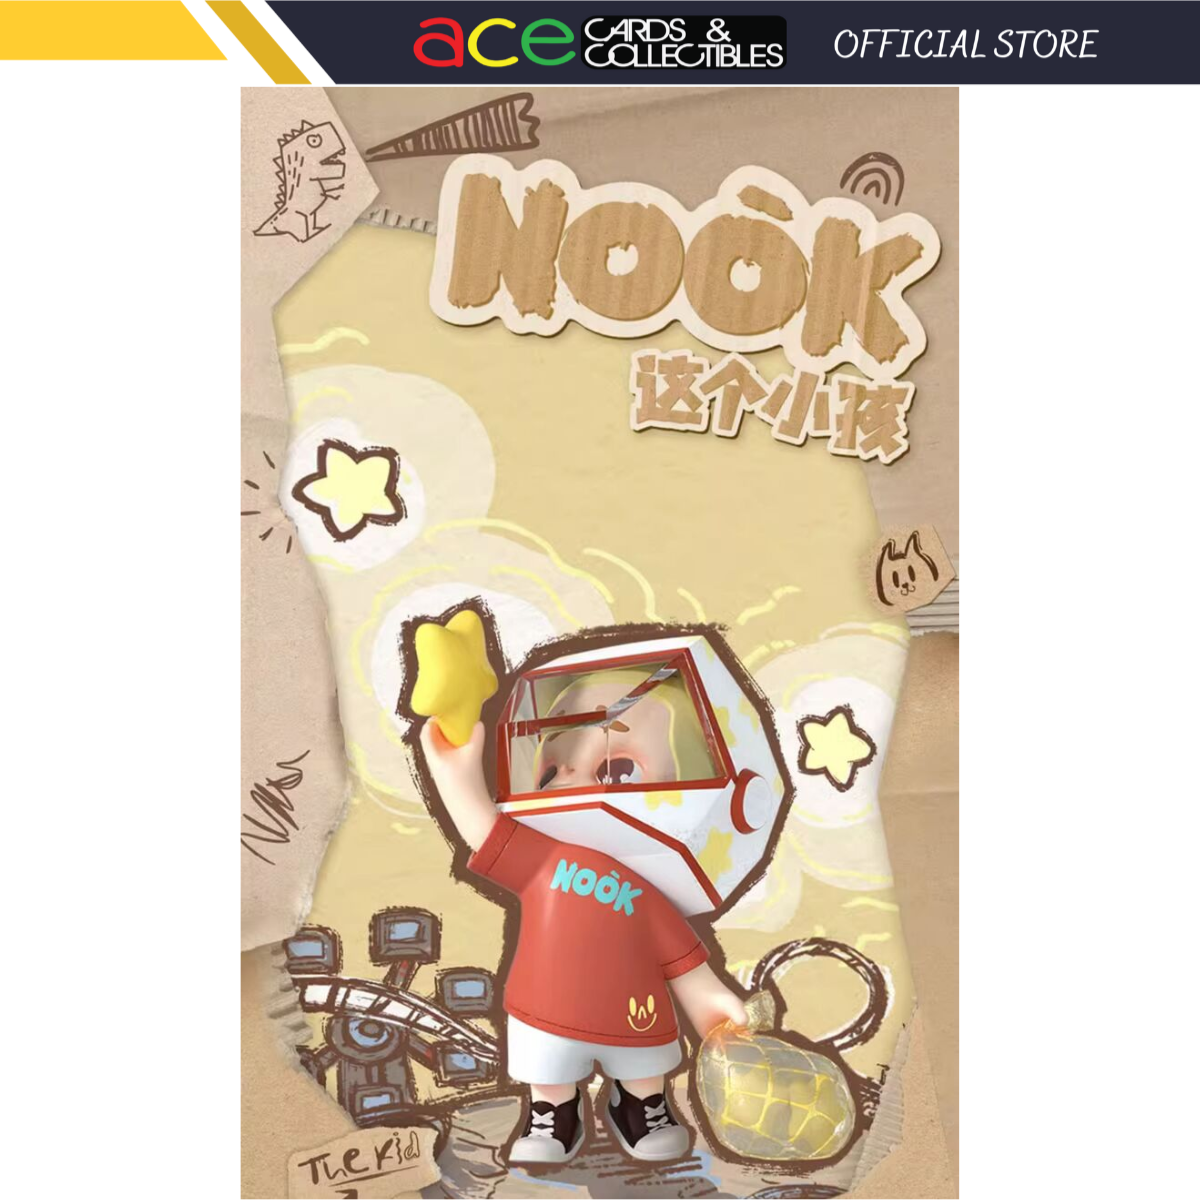 52Toys x NOOK This Kid Series-Single Box (Random)-52Toys-Ace Cards &amp; Collectibles